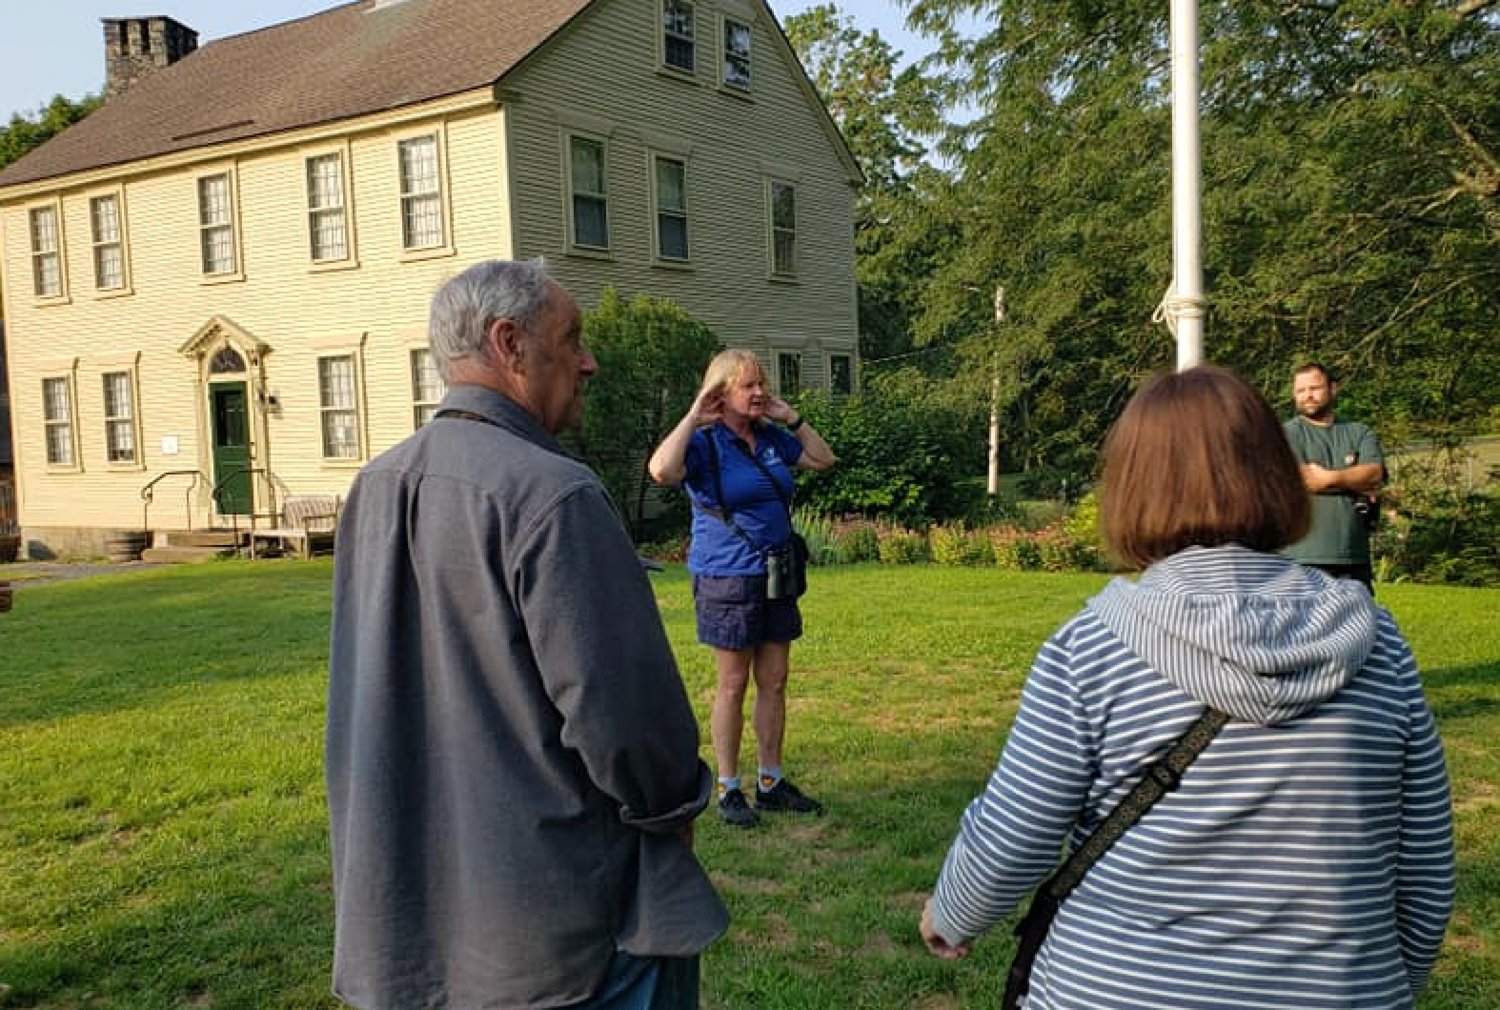 Participants in September’s Blackstone Valley Tourism Council Bird Walk listen to the Audubon Society’s Senior Director of Education and Wildlife Teacher Lauren Parmalee prior to embarking on the walk at Hunts Mills in Rumford, R.I.